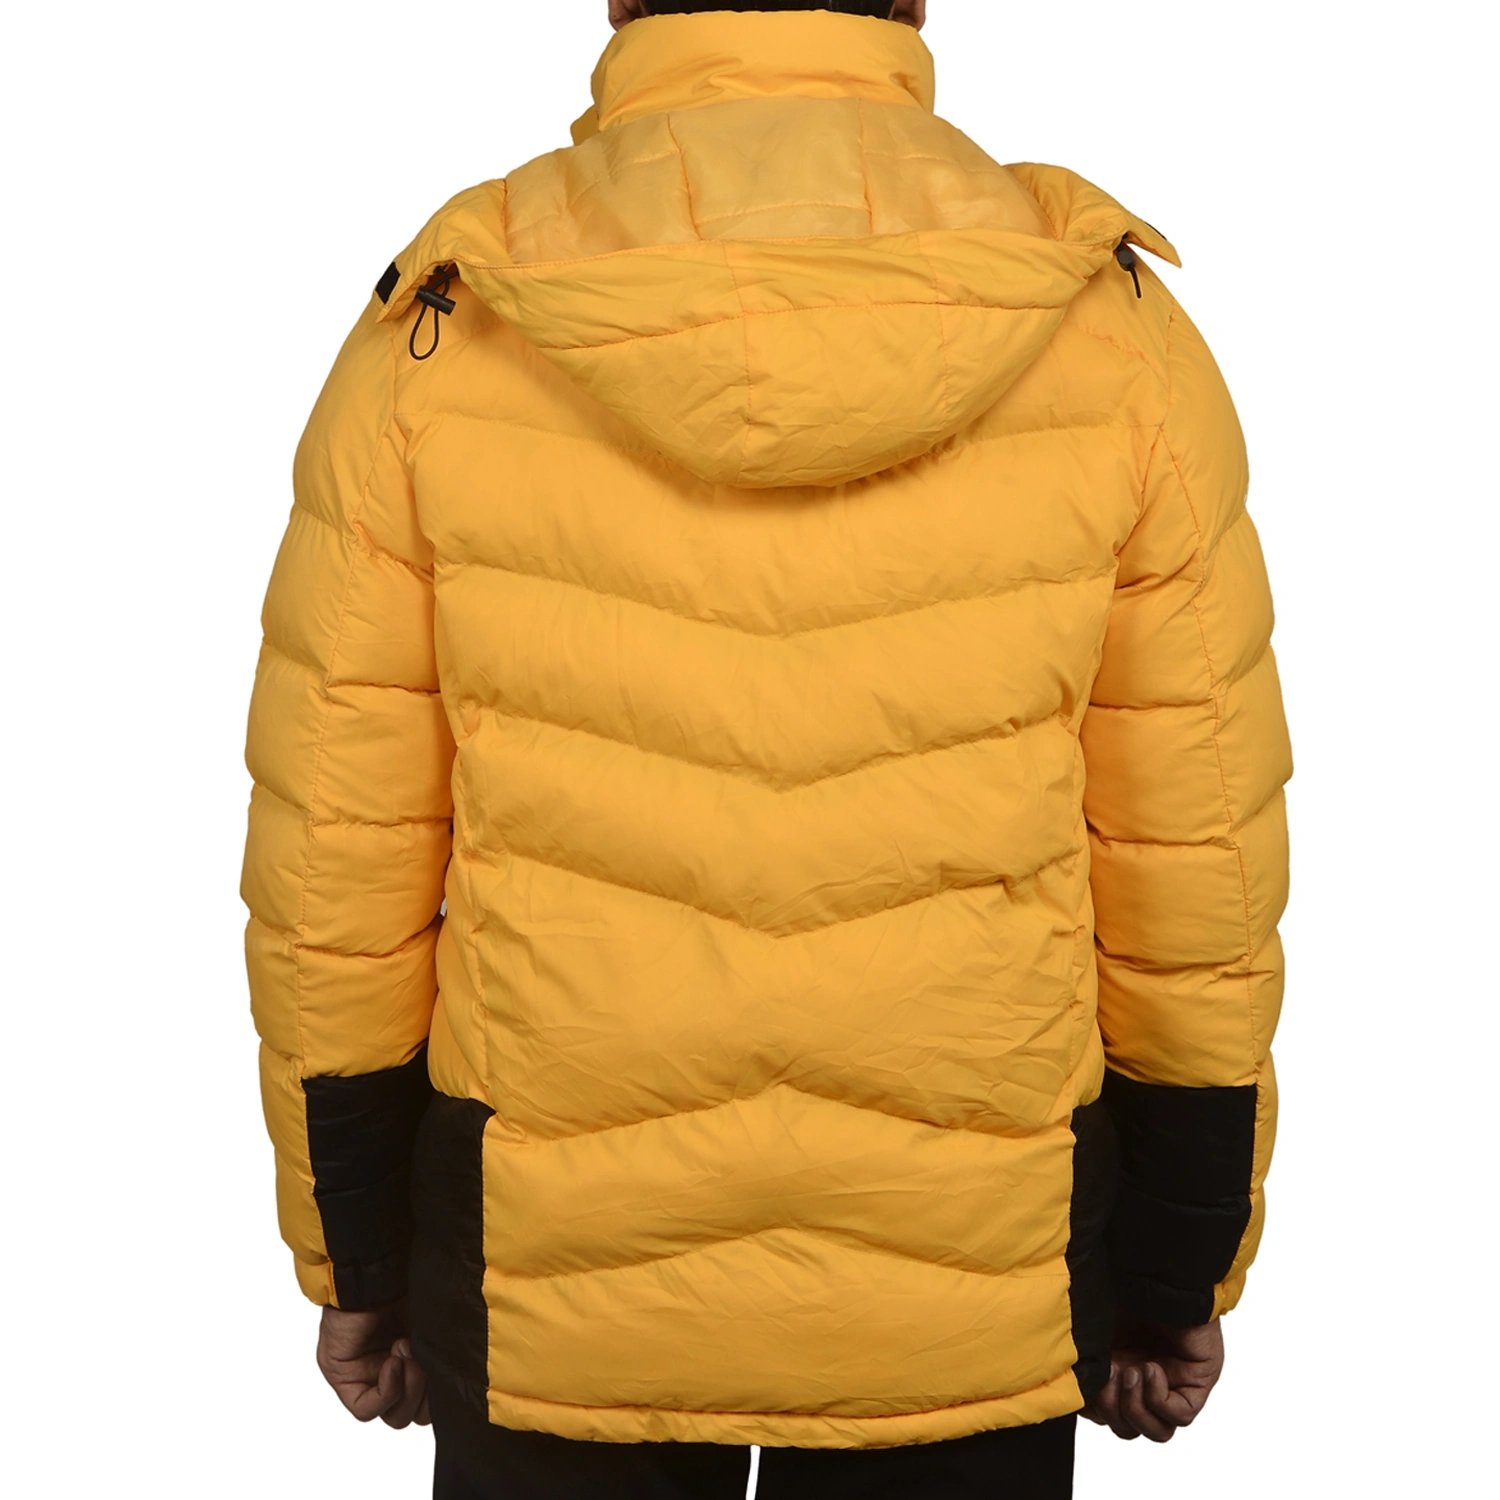 K2 Survivor Down Jacket for Men: Stylized Functionality for Extreme Cold Weather Expeditions (Up to -20°C)-S-Yellow-4